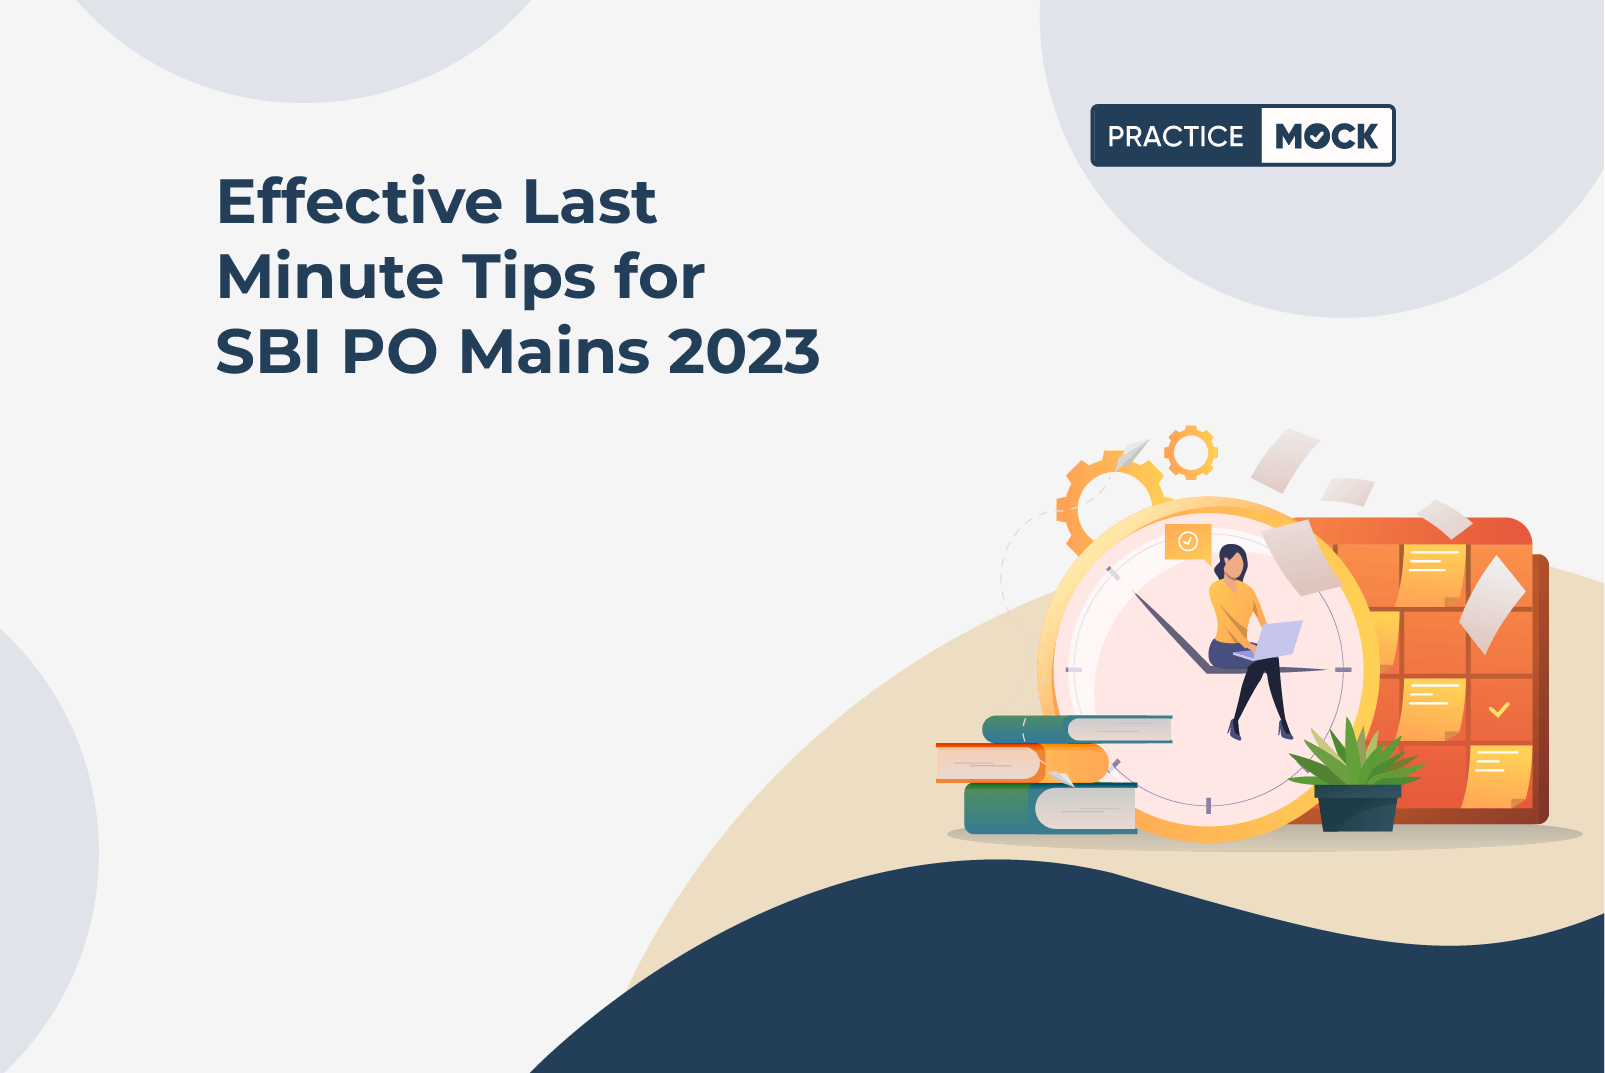 Effective Last Minute Tips for SBI PO Mains 2023